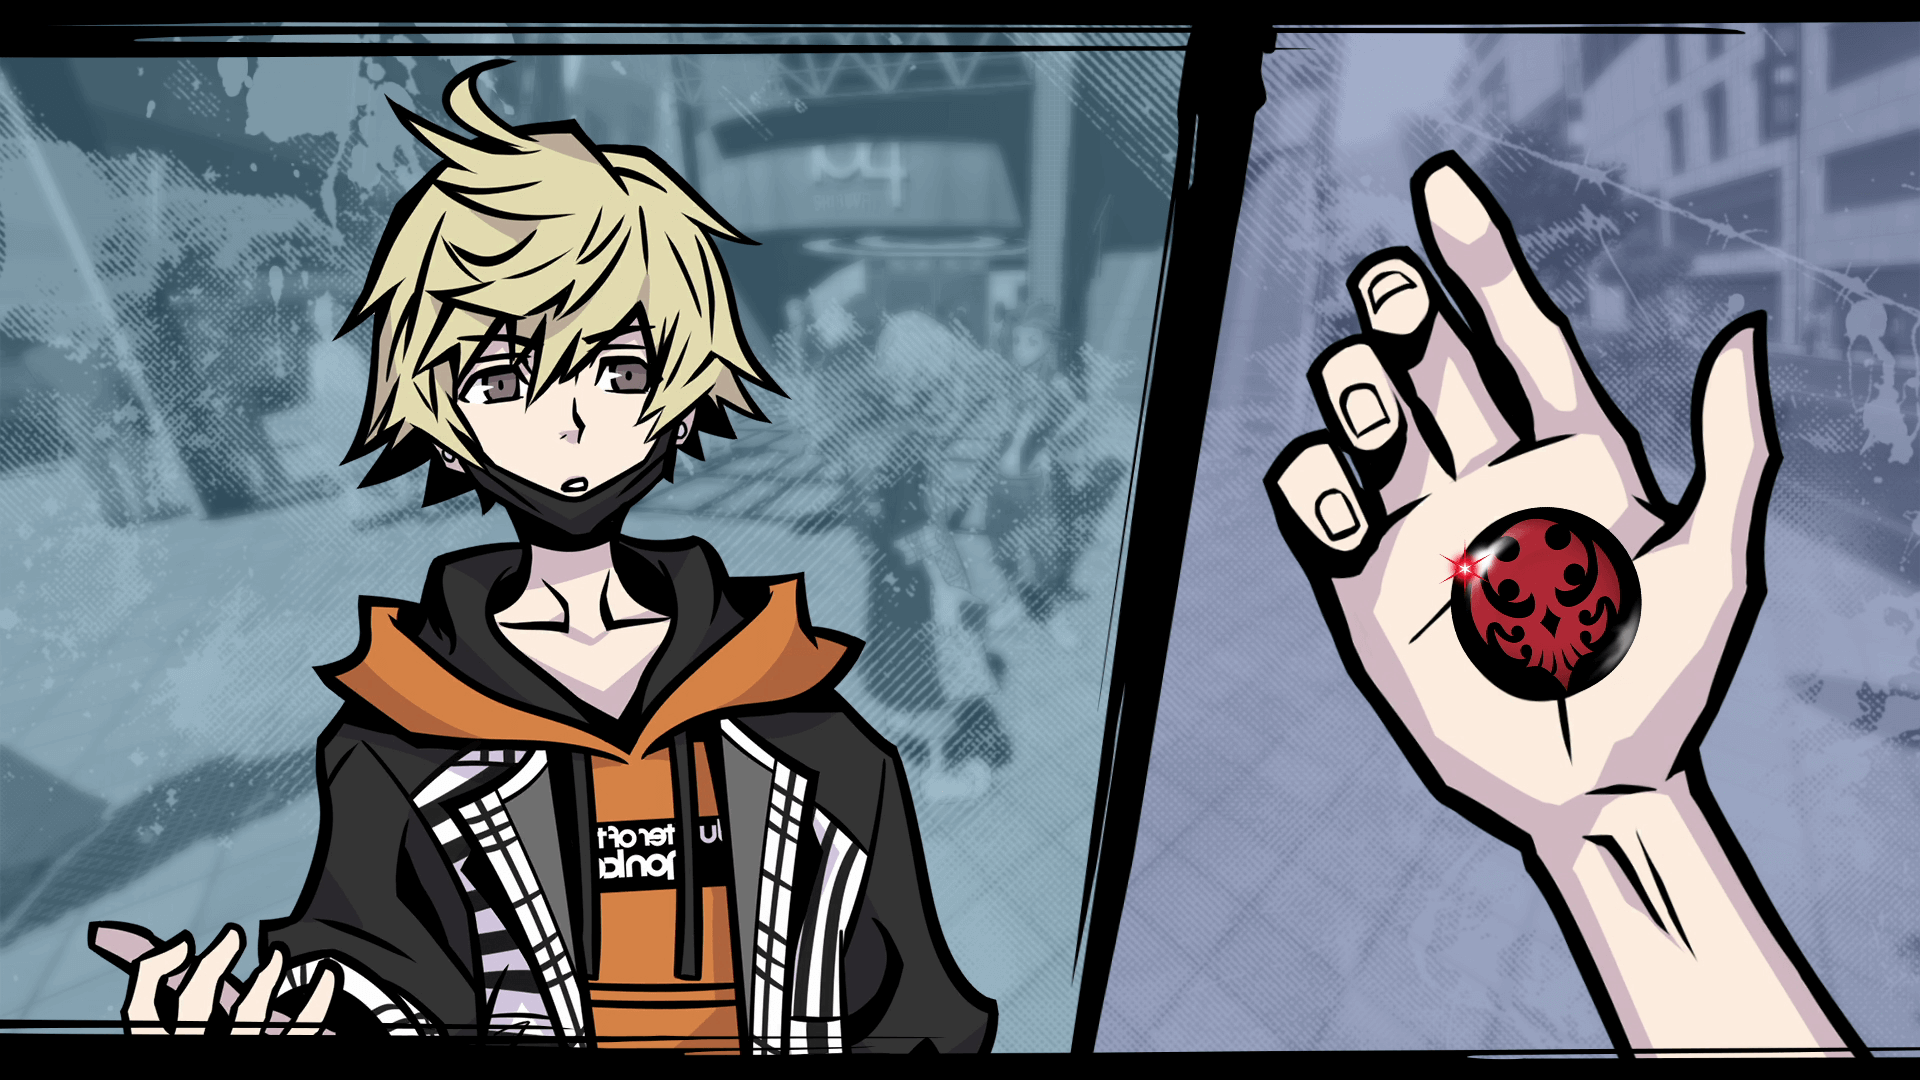 One of the characters in Neo: The World Ends With You looks at a pin in his hand